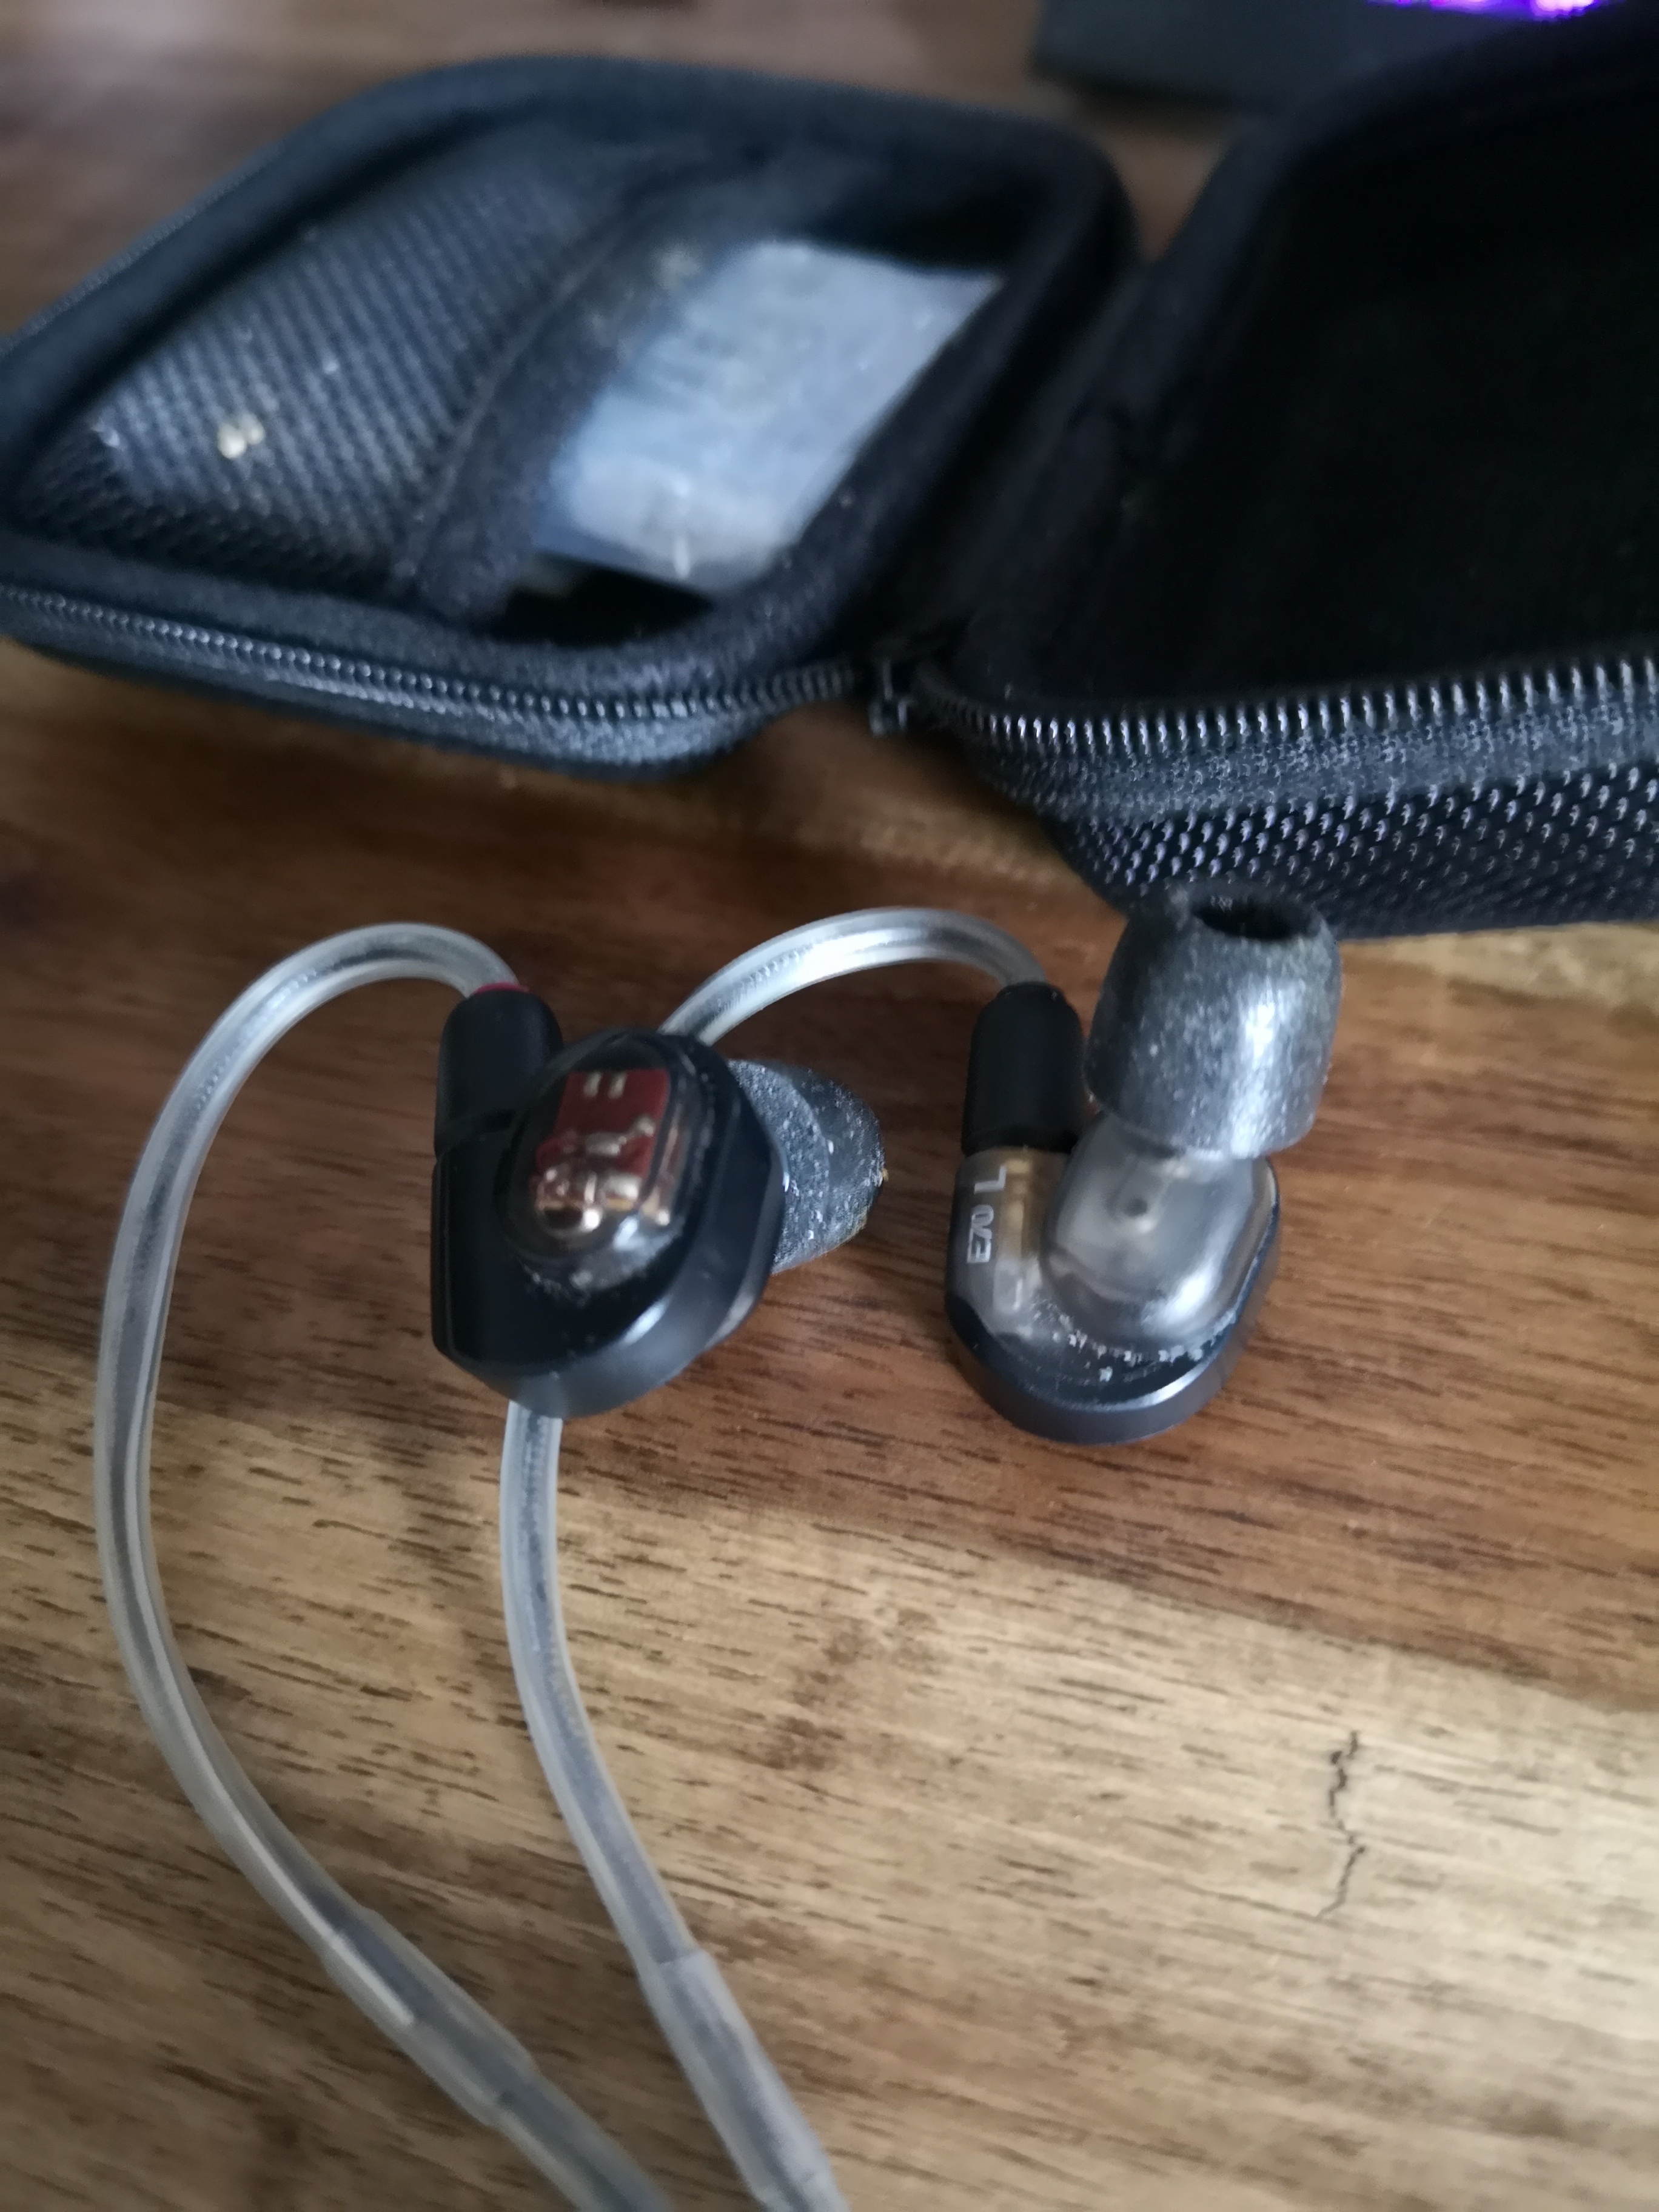 Audio-technica ATH E70 what do you thing? - In-Ear Monitors (IEM